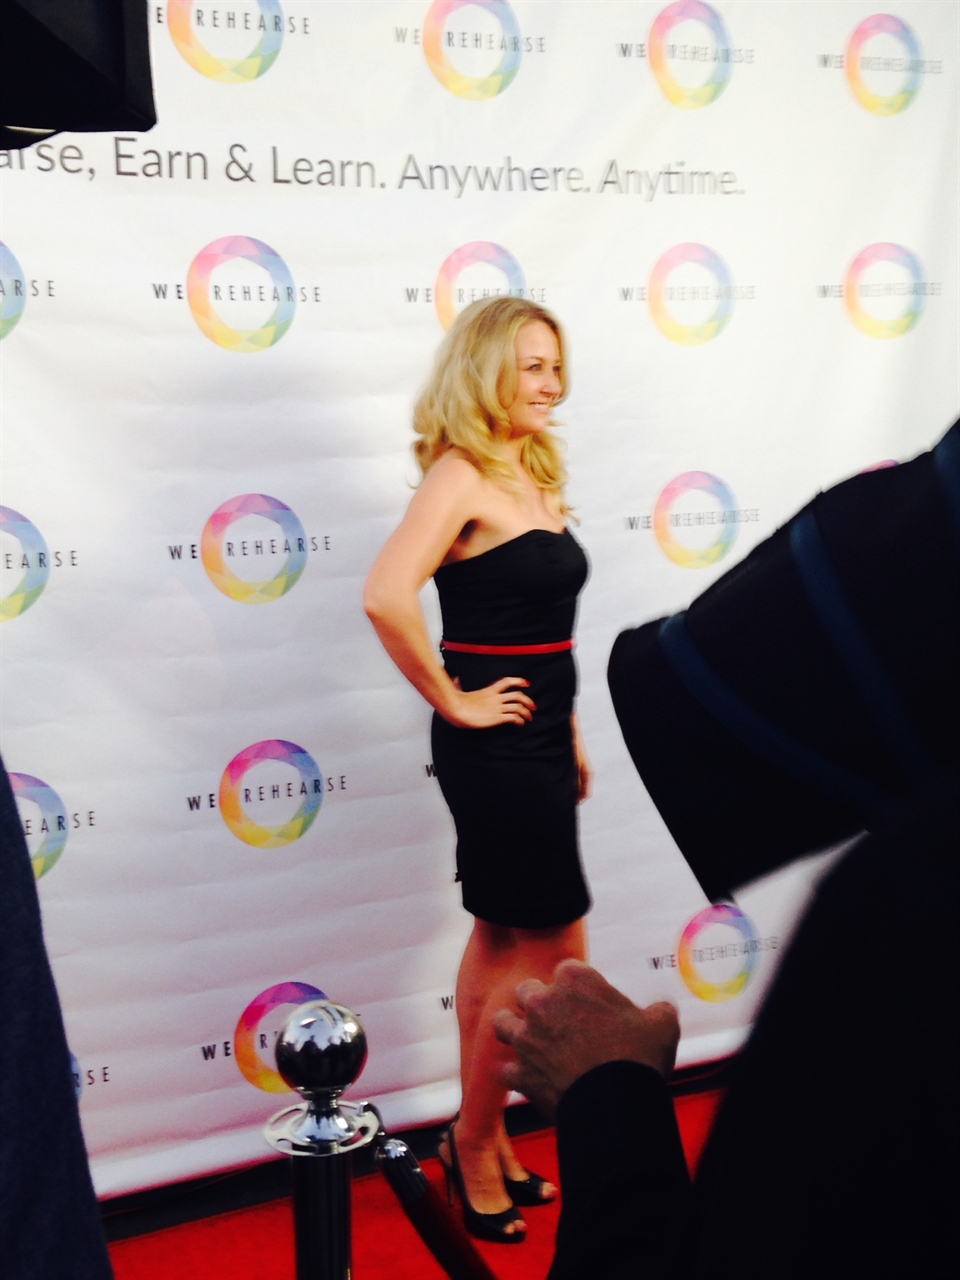 Janine on the red carpet attending the WeRehearse Launch Party event in Hollywood.